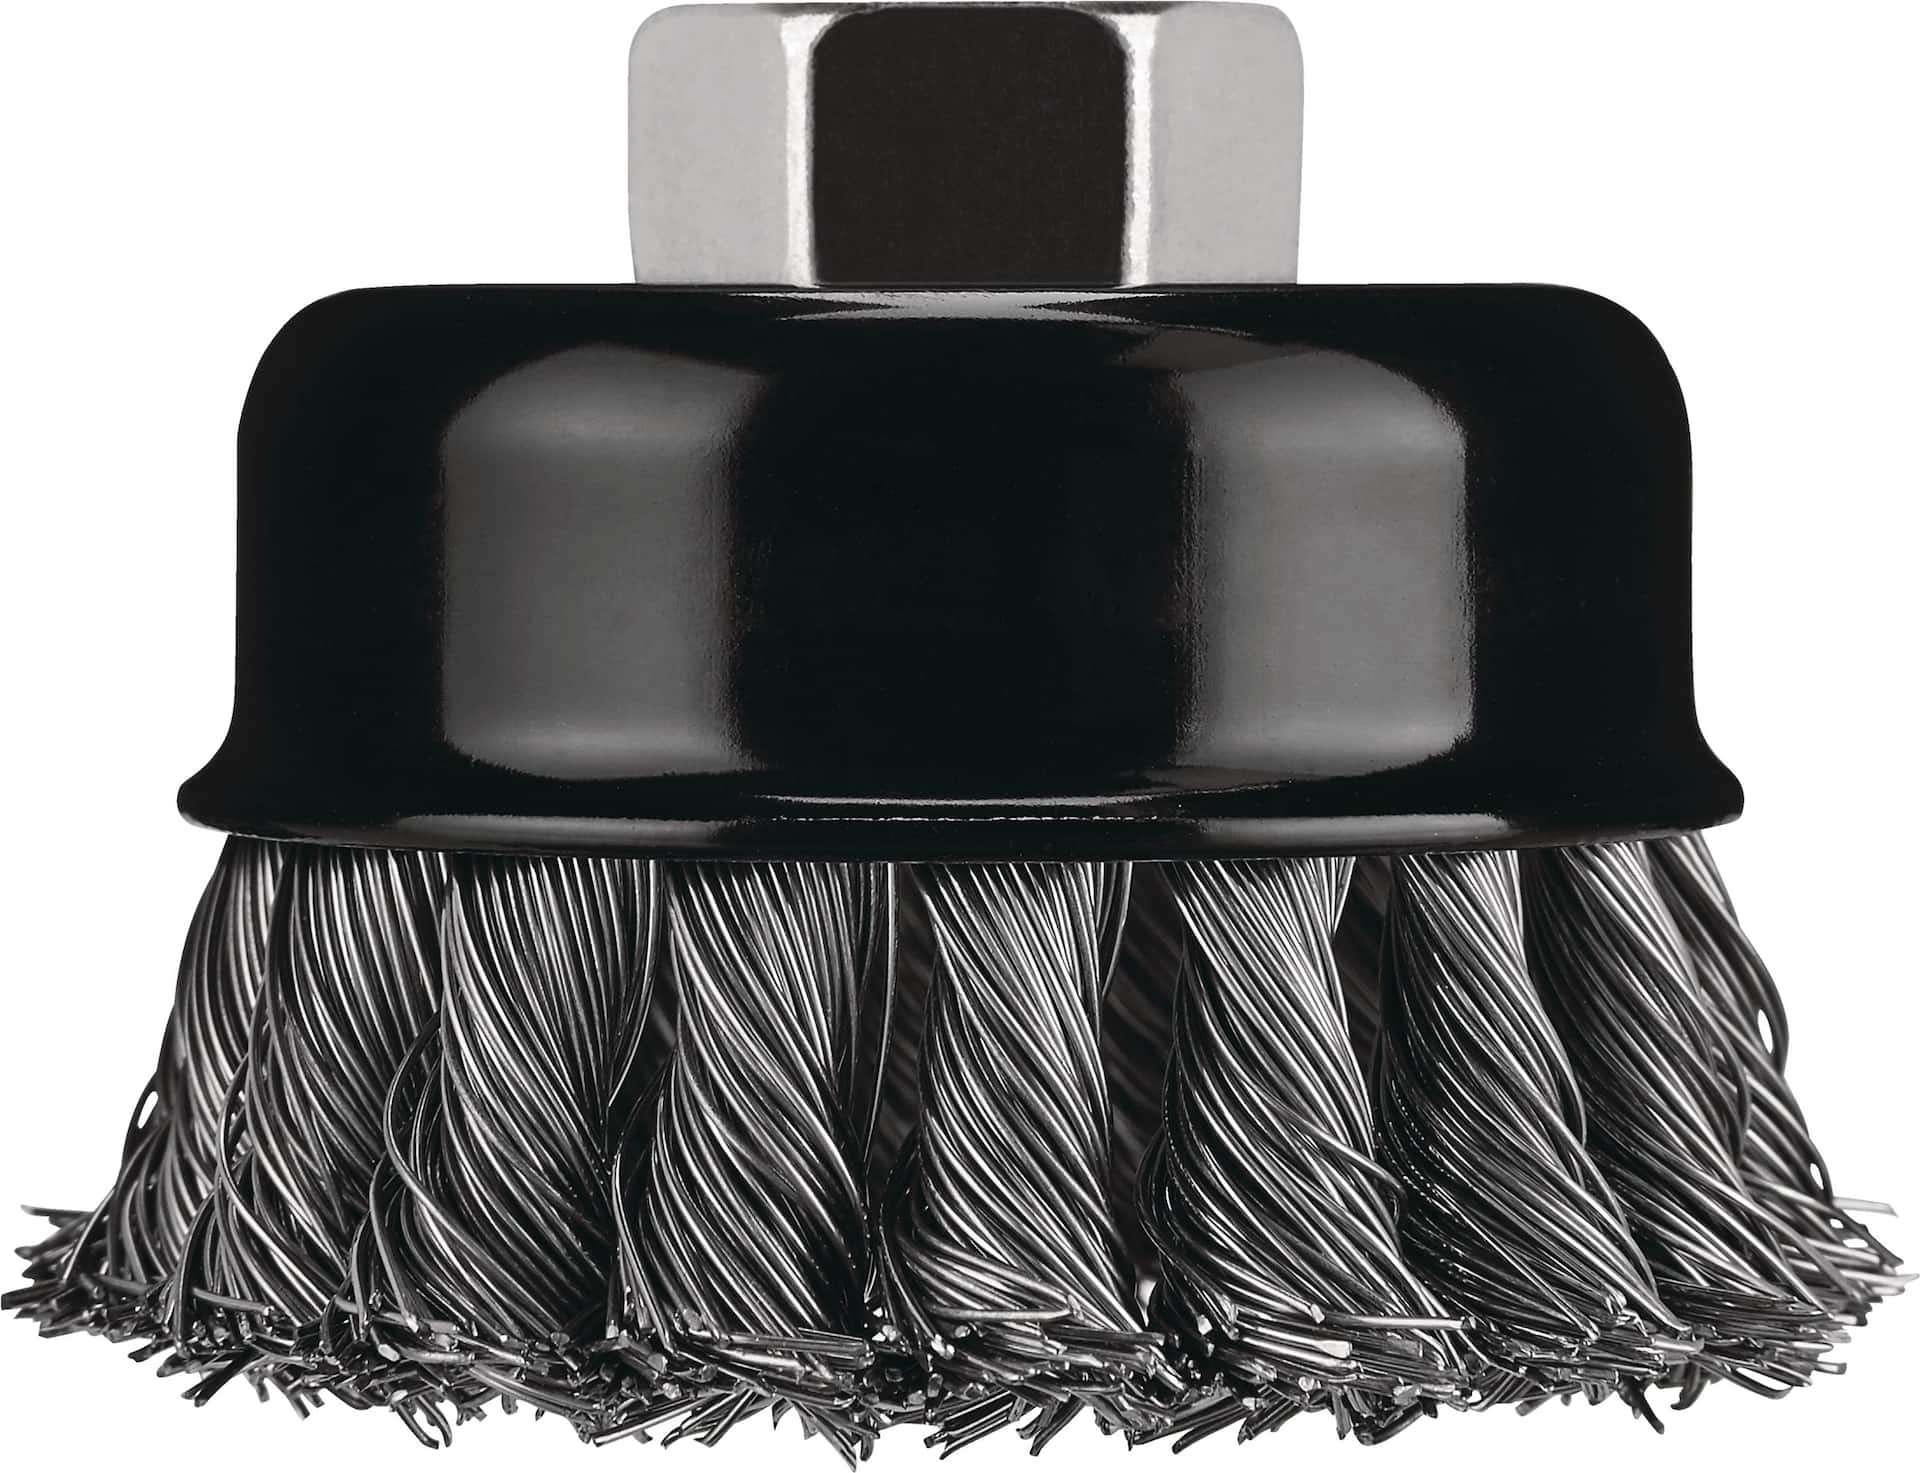 Aain 8 Pack Wire Wheel Brush Cup Brush Set, 3 Inch Crimped Cup